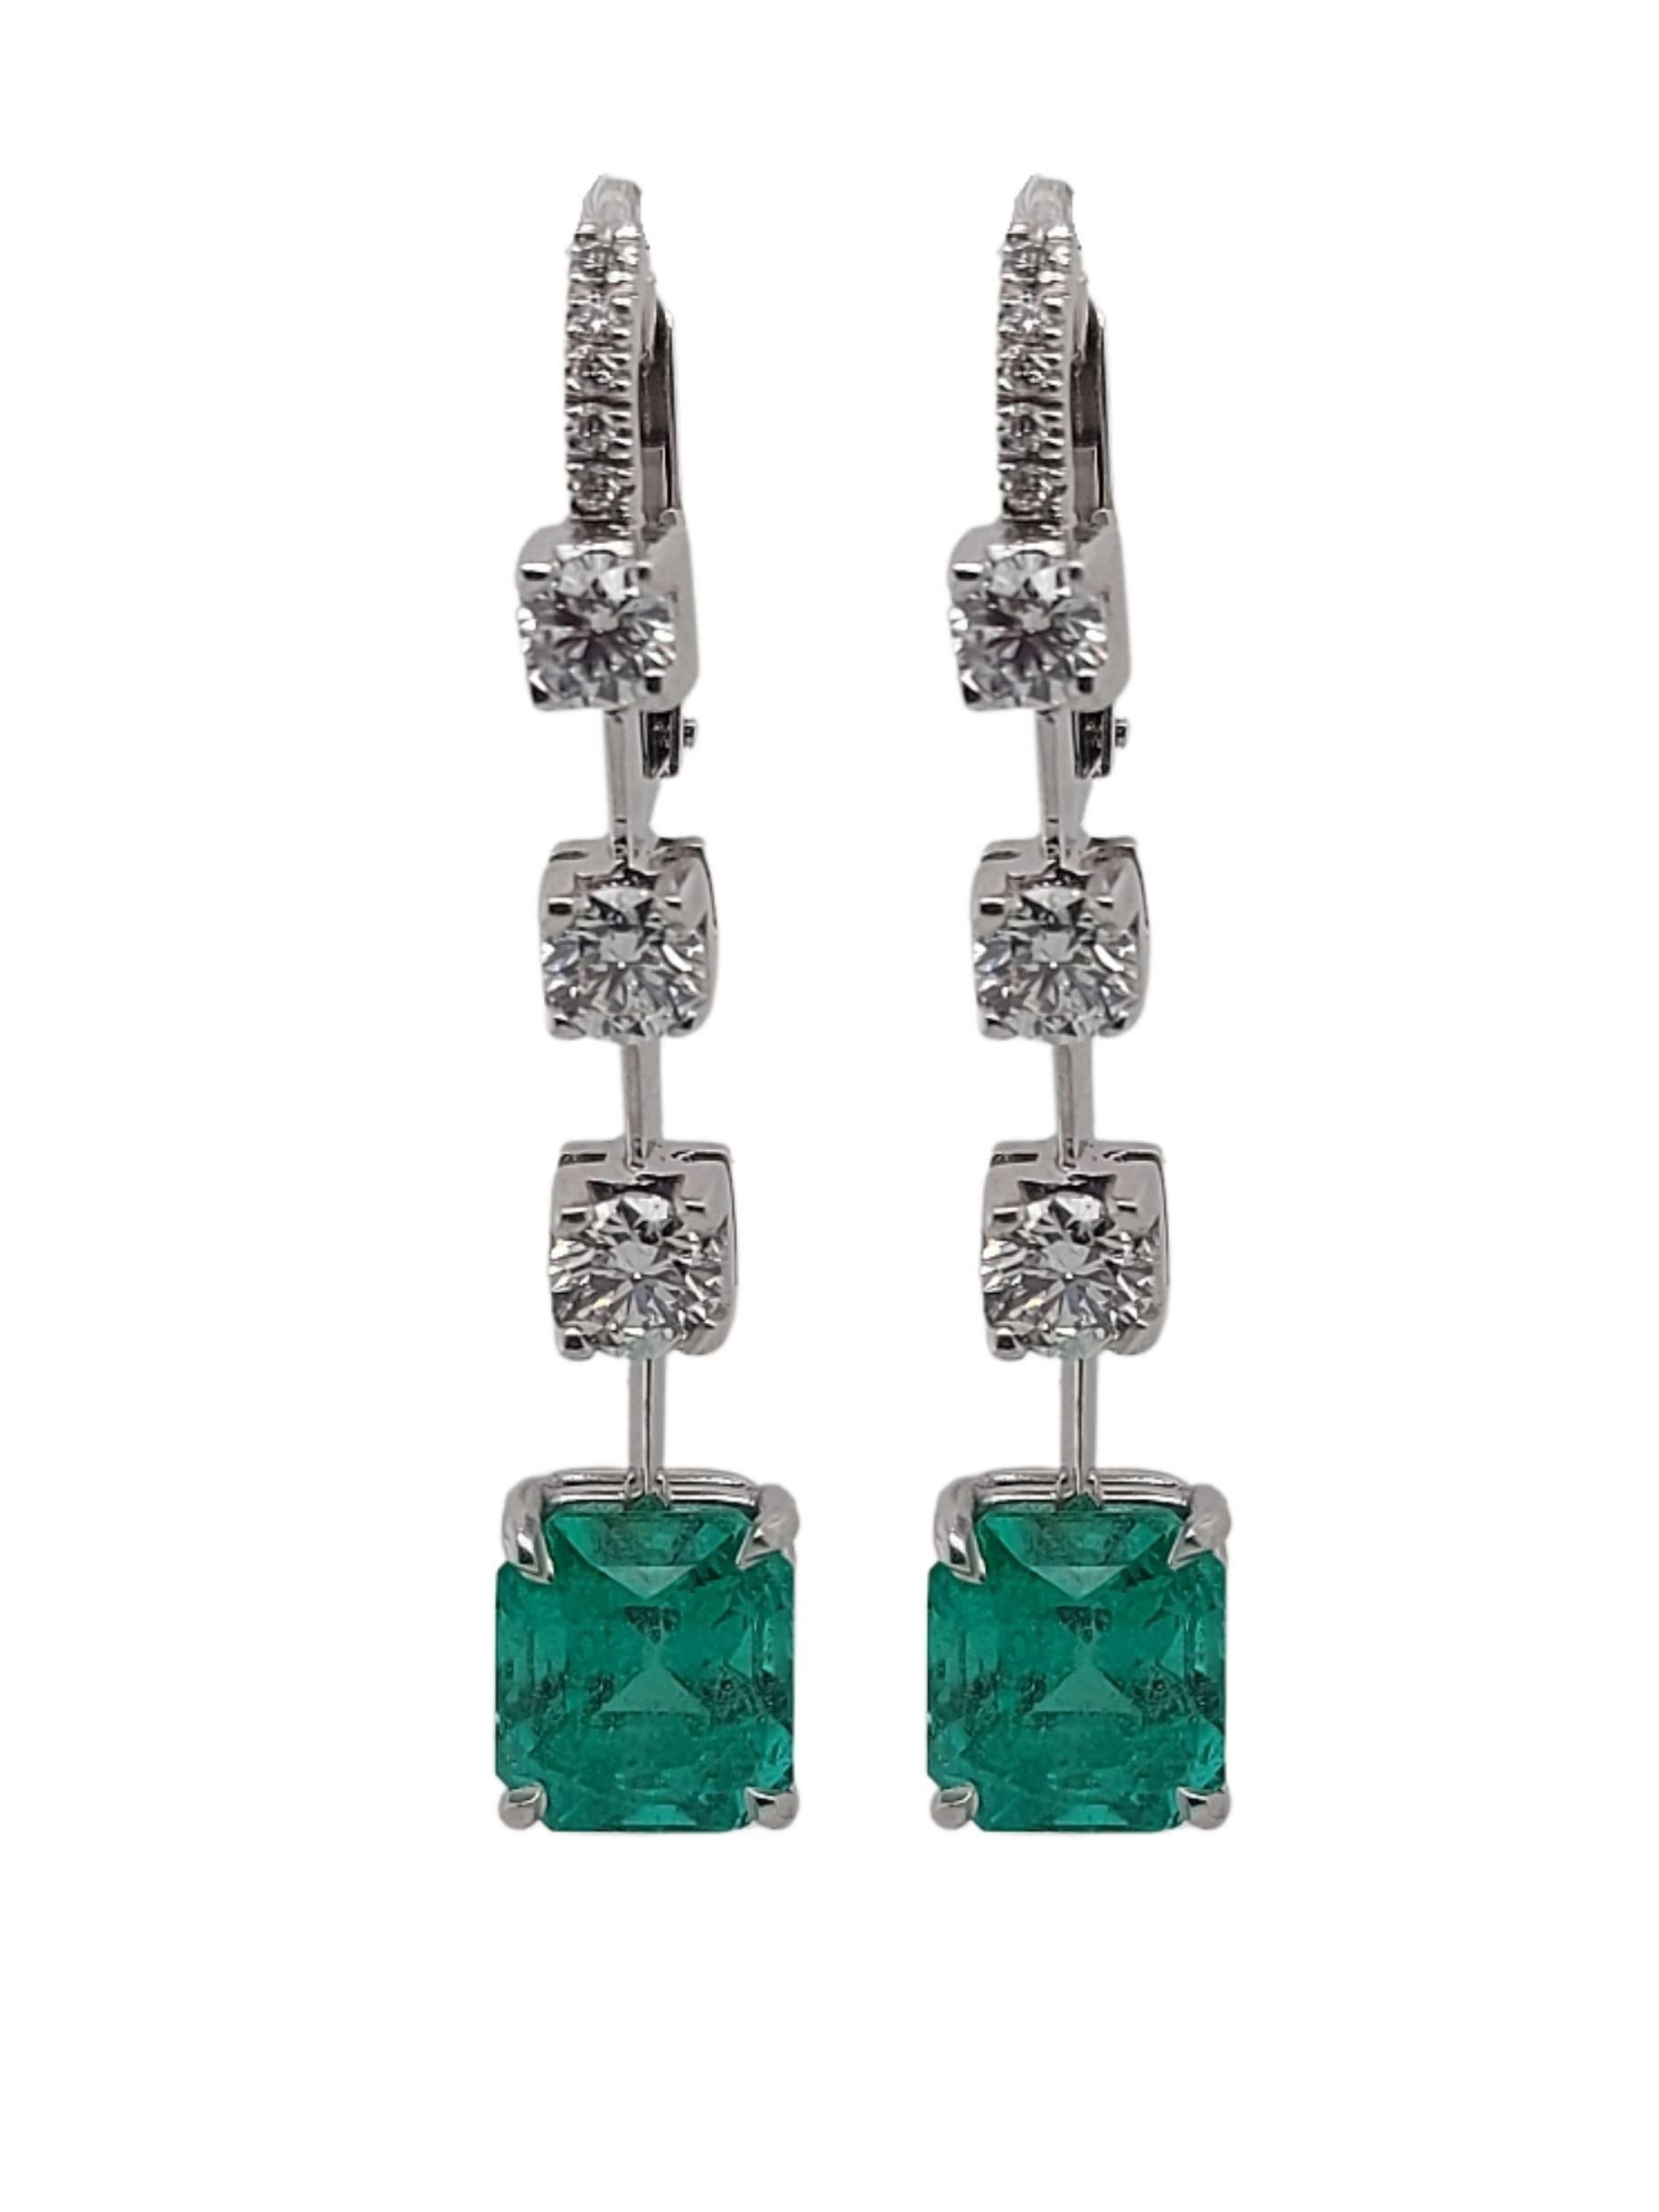 Magnificent Dangling Earrings with 5.29ctColombian Minor Emerald, 1.51ct Diamonds
 
Emerald: 2.51ct and 2.78ct Octagonal, Intense green, Colombian Emerald Minor oil

Diamonds: Brilliant cut diamonds together 1.51ct

Material: 18kt white